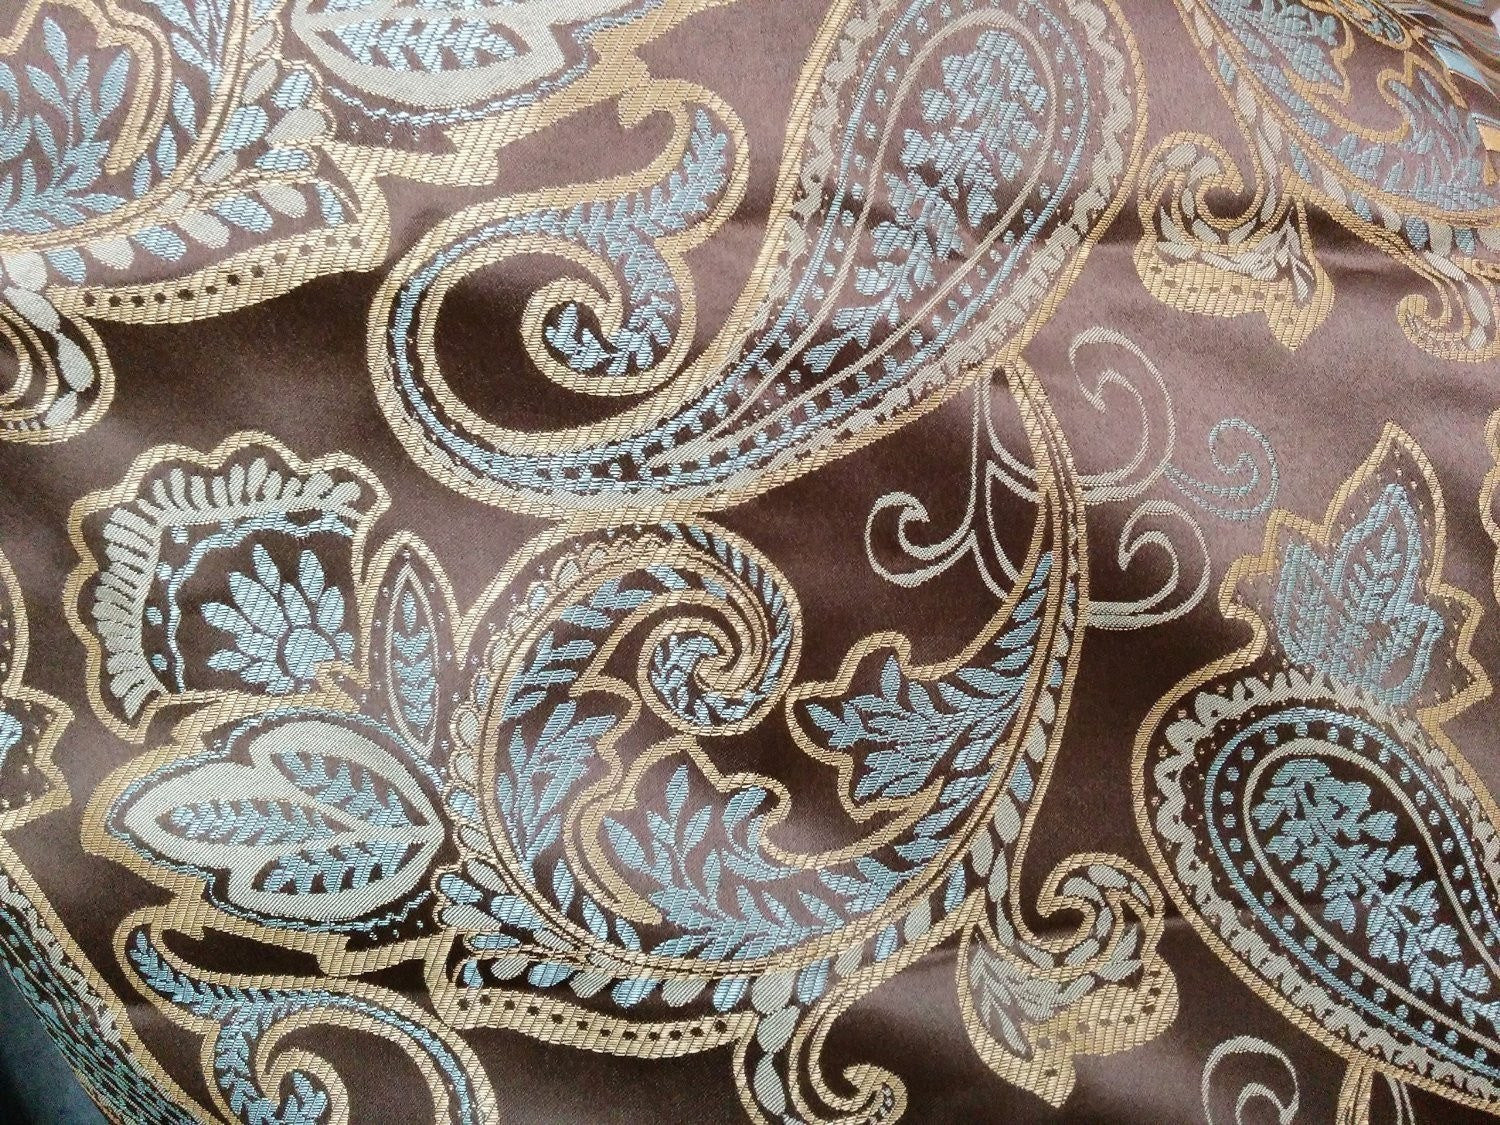 Tache Chenille Elegant Paisley Floral Striped Brown Blue Eastern Spring Comforter Set With Zipper (14070) - Tache Home Fashion